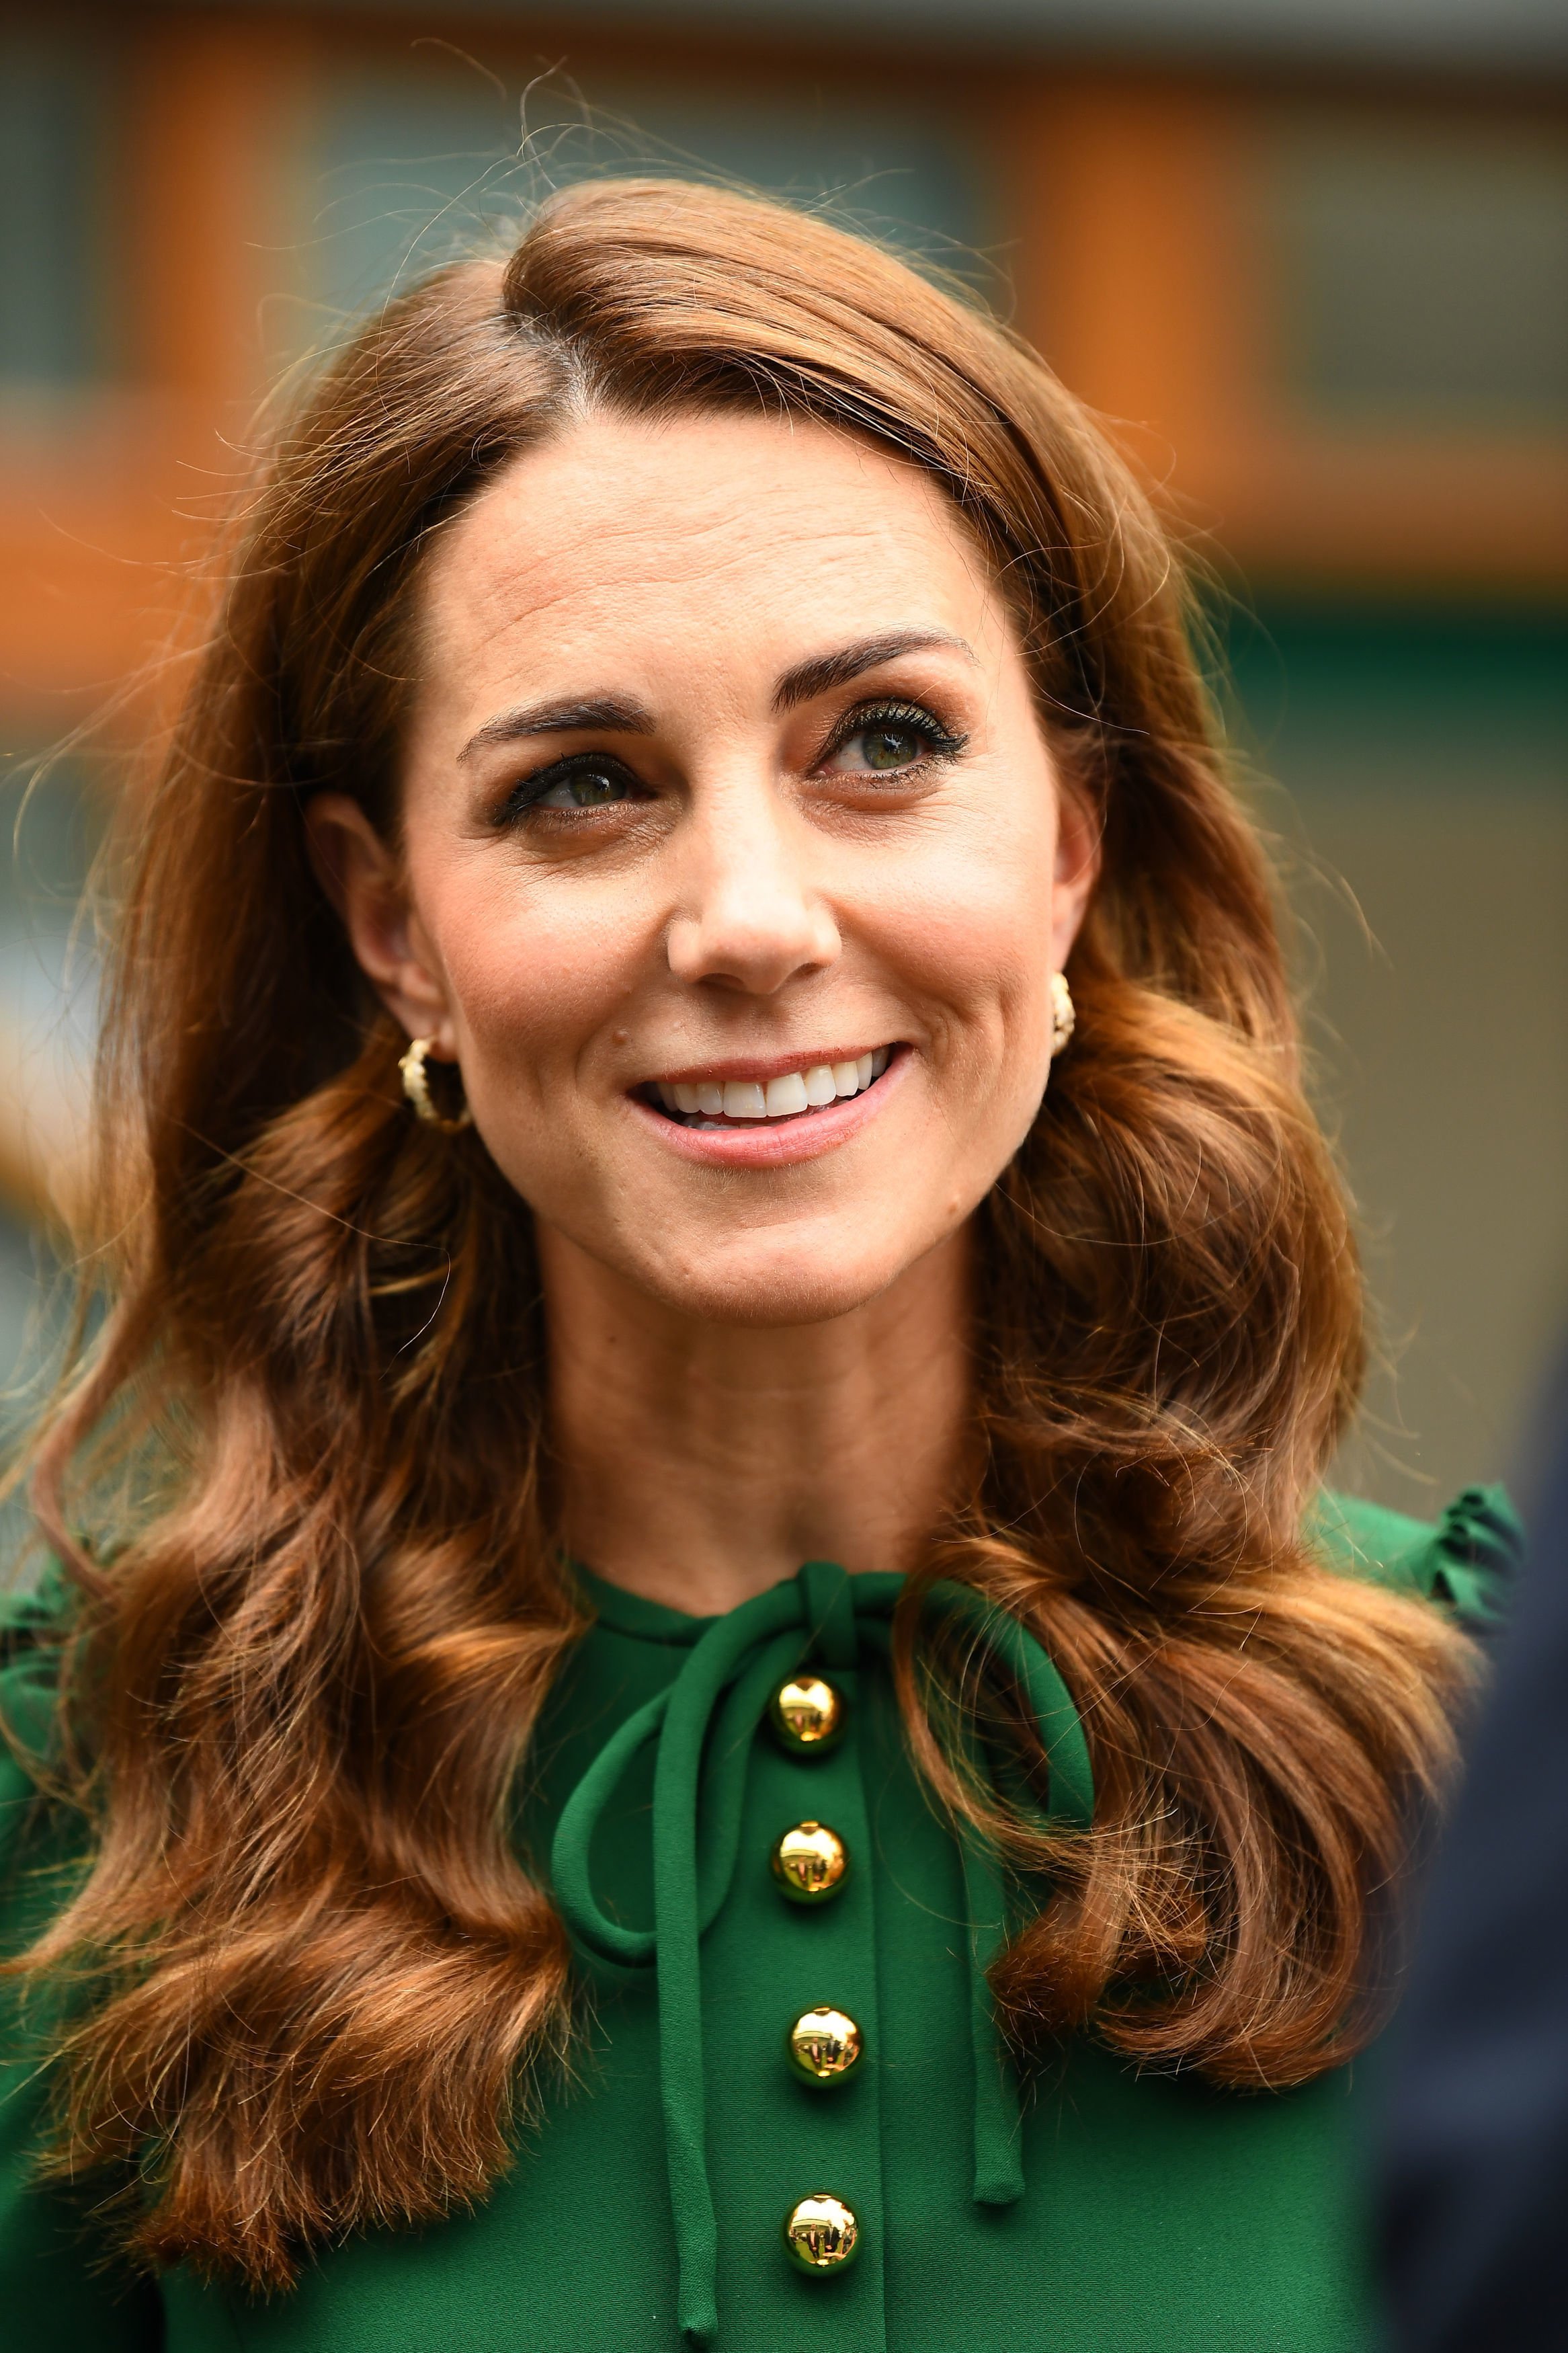 Duchess Kate at Wimbledon on July 13, 2019 | Photo: Getty Images